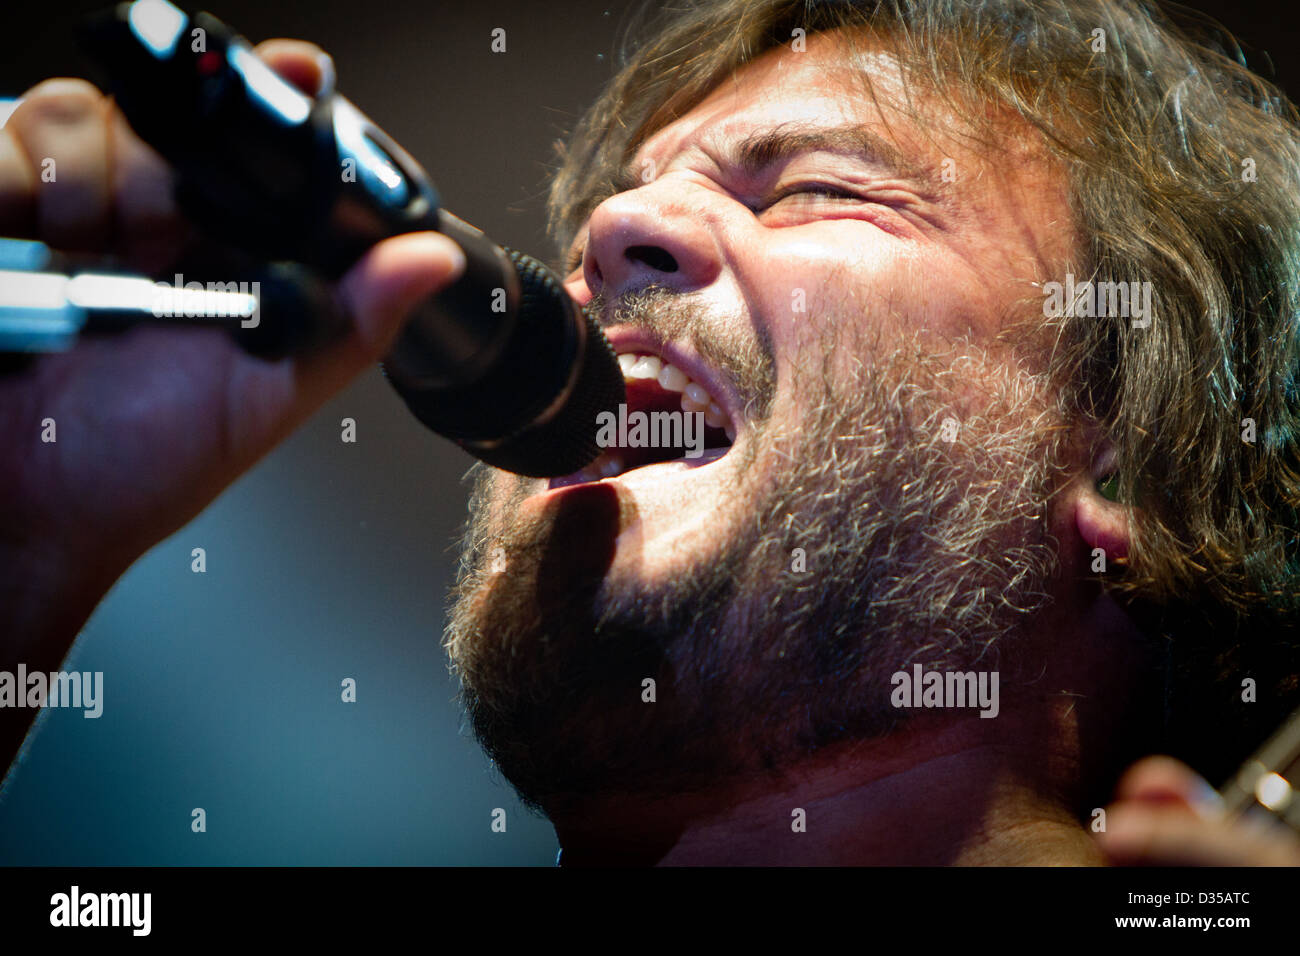 October 16, 2012 - During the 'Rize Of The Fenix Tour 2012' the Tenacious D performs at The Mediolanum Forum, Milan, Italy Stock Photo